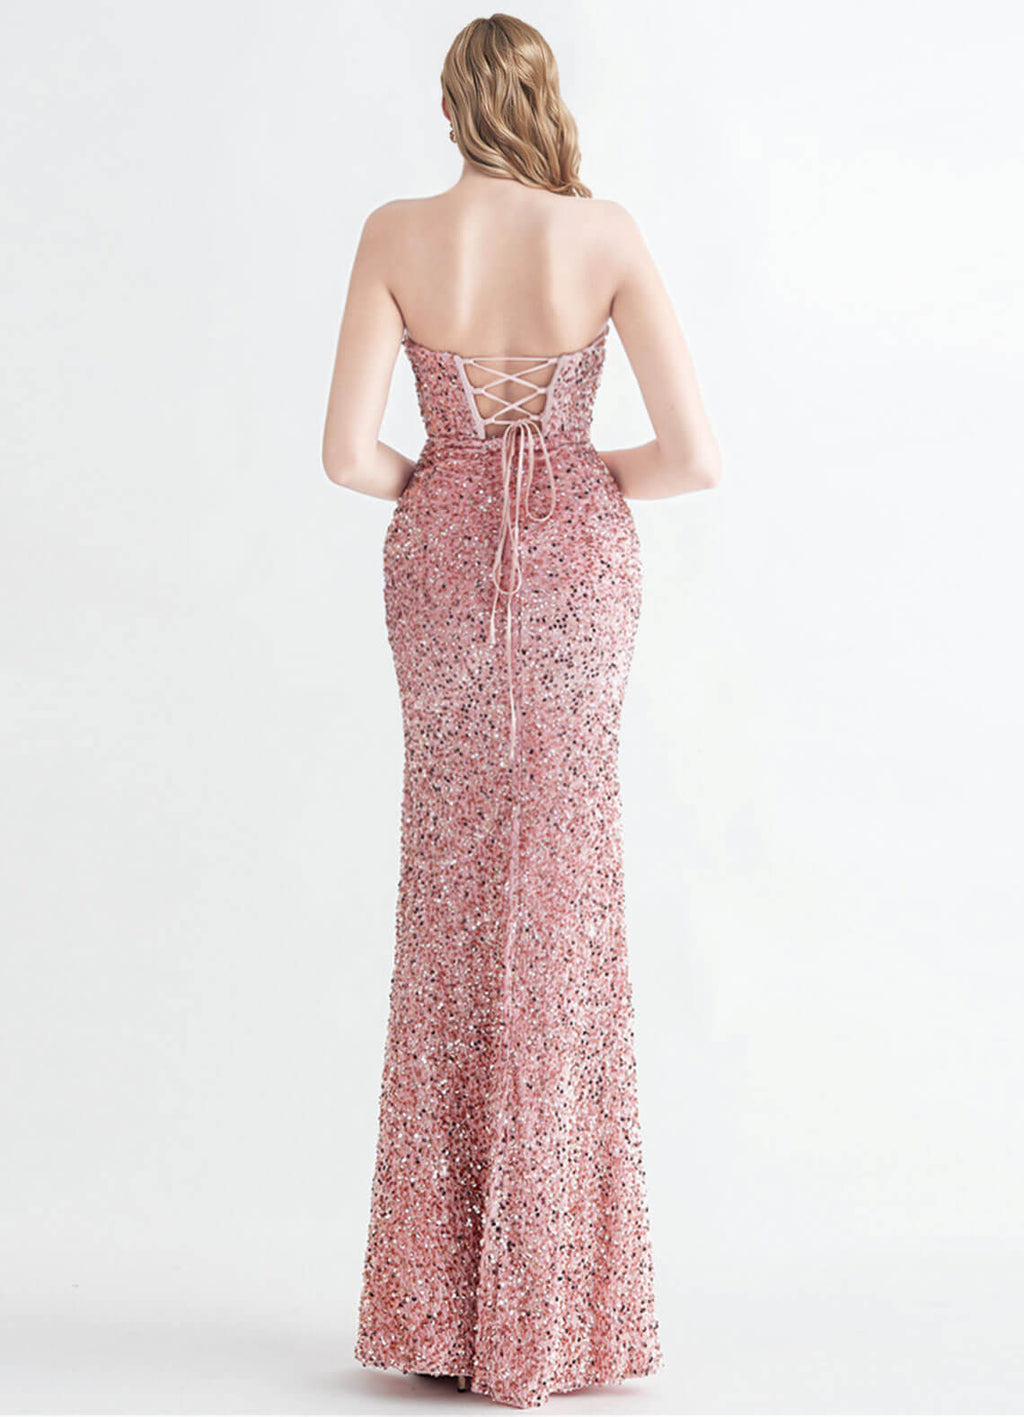 NZ Bridal Pink Gold Strapless Sweetheart Maxi Sequin Prom Dress 31155 Victoria a